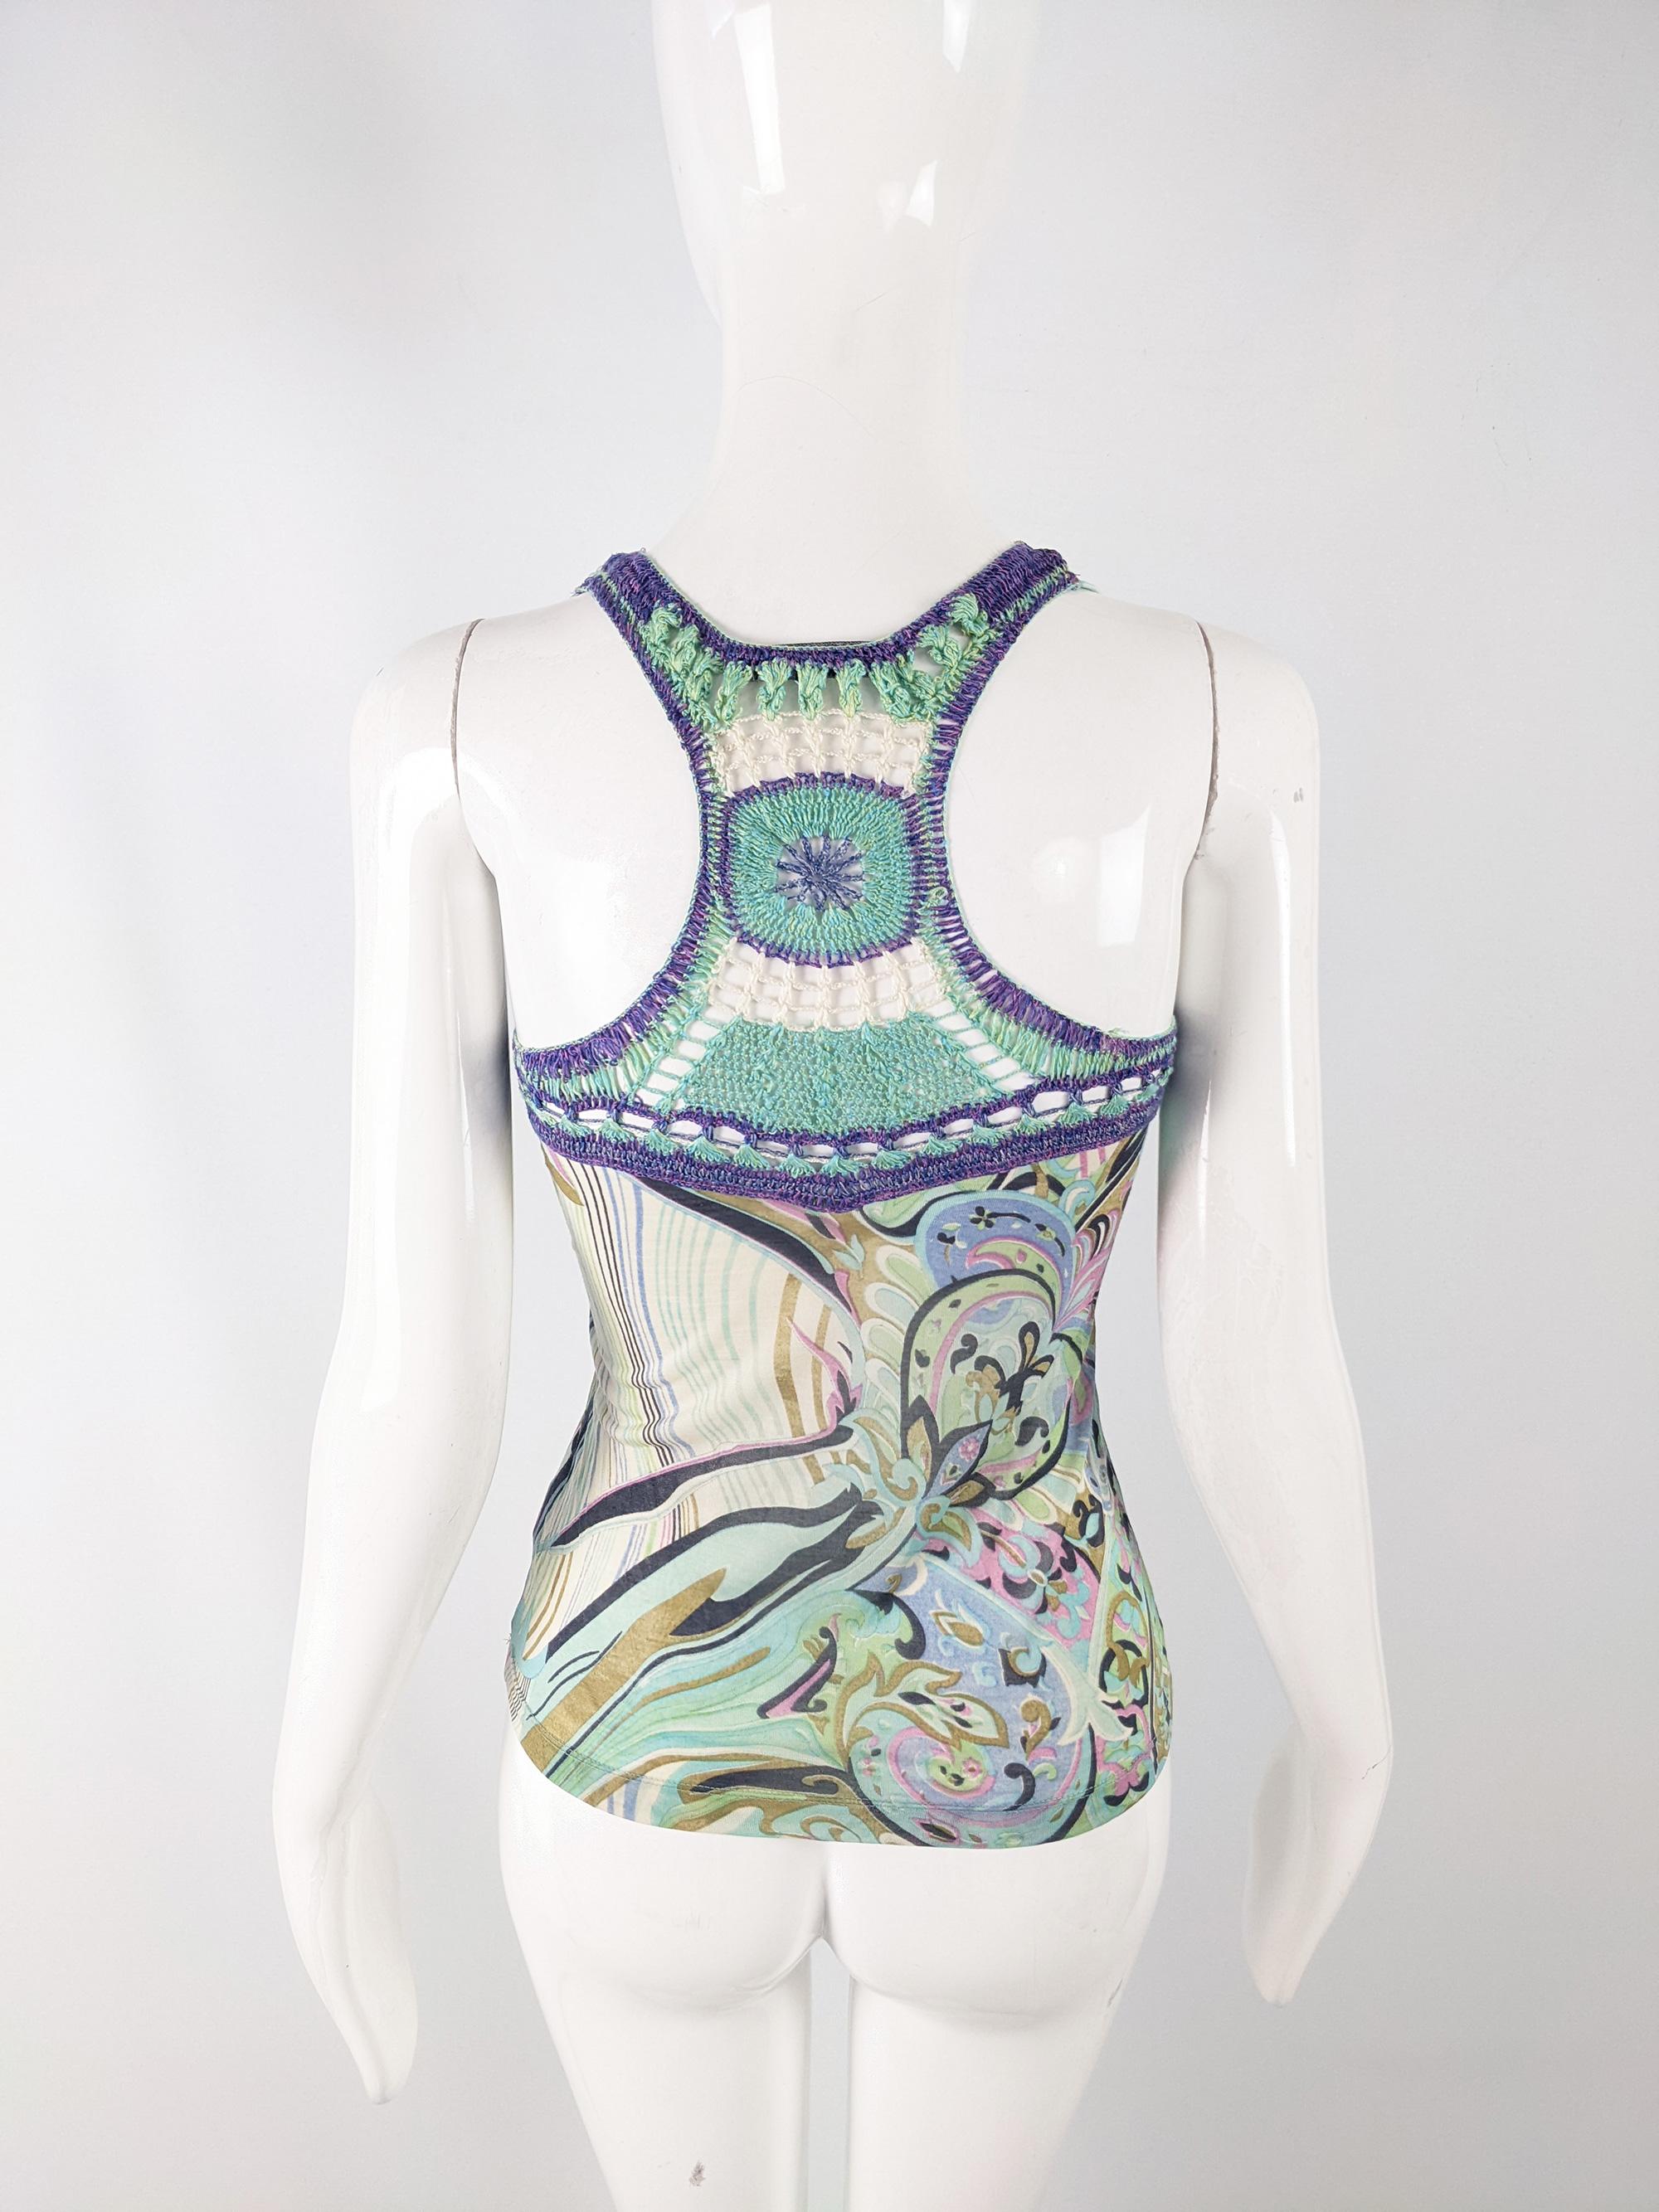 Etincelle Couture Vintage Silk Jersey Psychedelic Print Racer Back Tank Top  In Good Condition For Sale In Doncaster, South Yorkshire